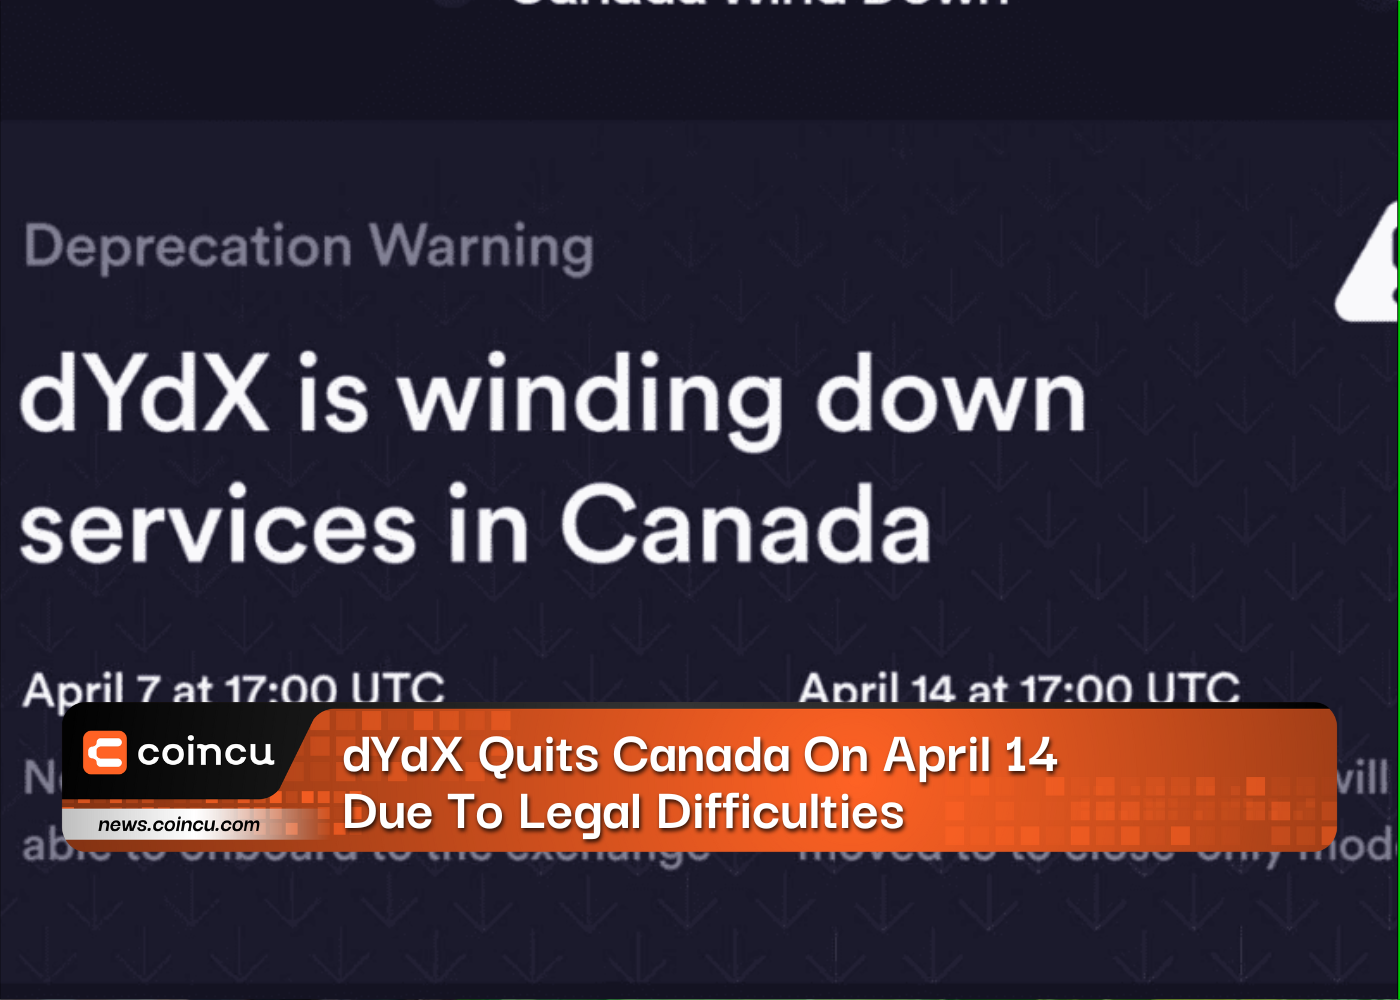 dYdX Quits Canada On April 14 Due To Legal Difficulties